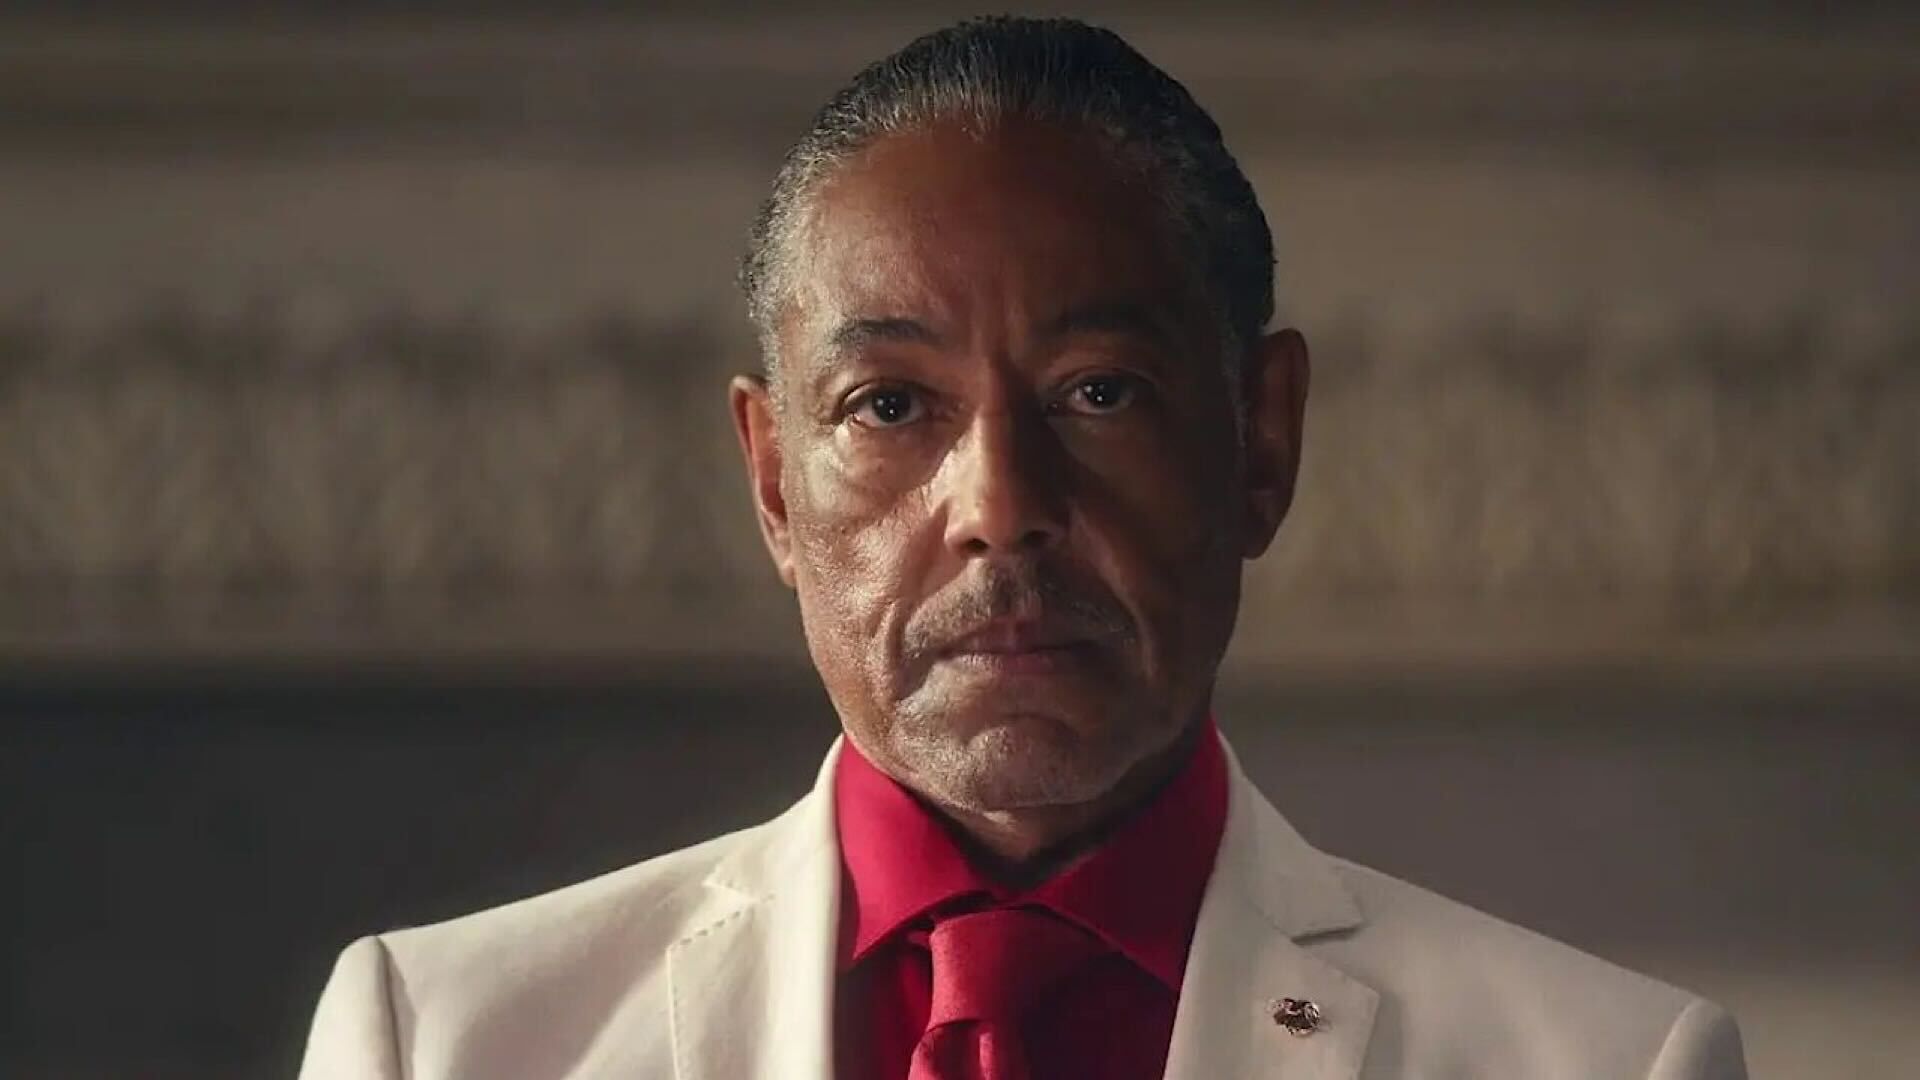 Giancarlo Esposito looking serious with red shirt and tie